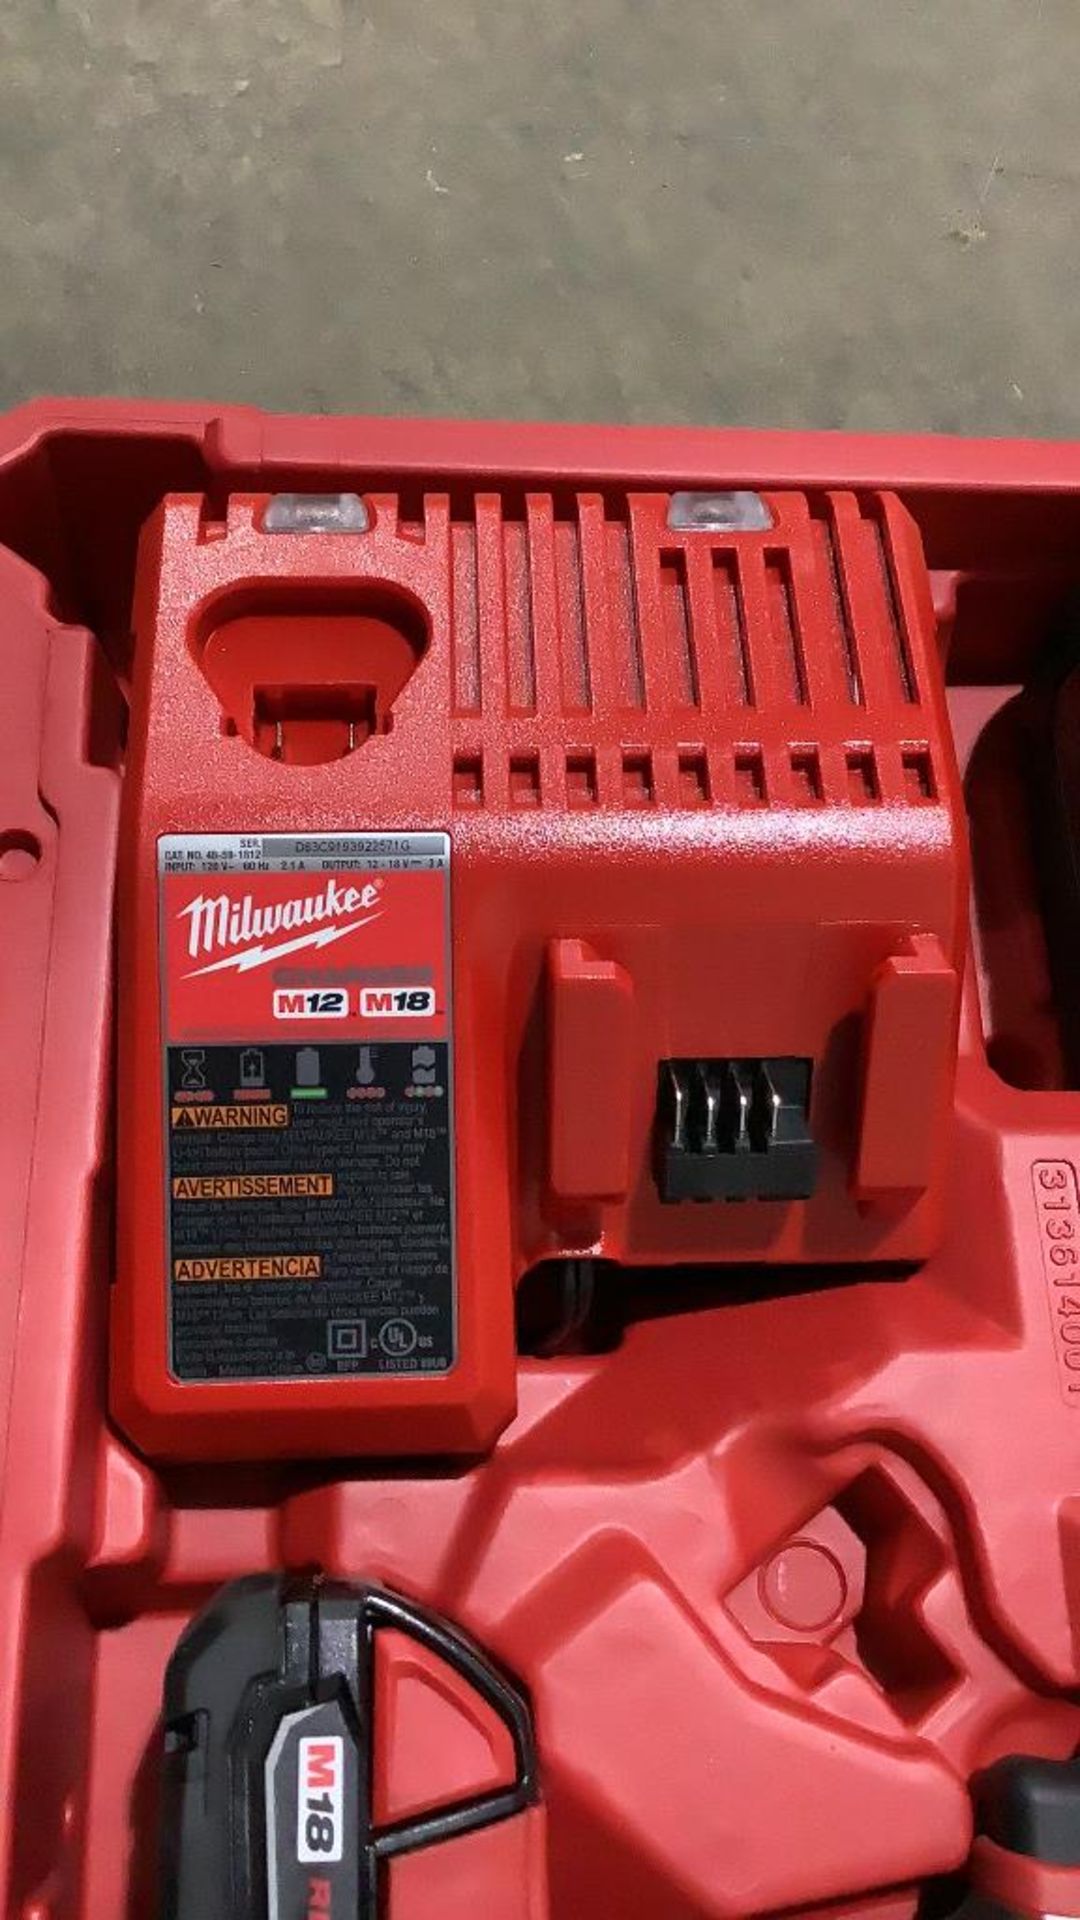 Milwaukee Cordless 1/2" Drill/Driver - Image 5 of 10